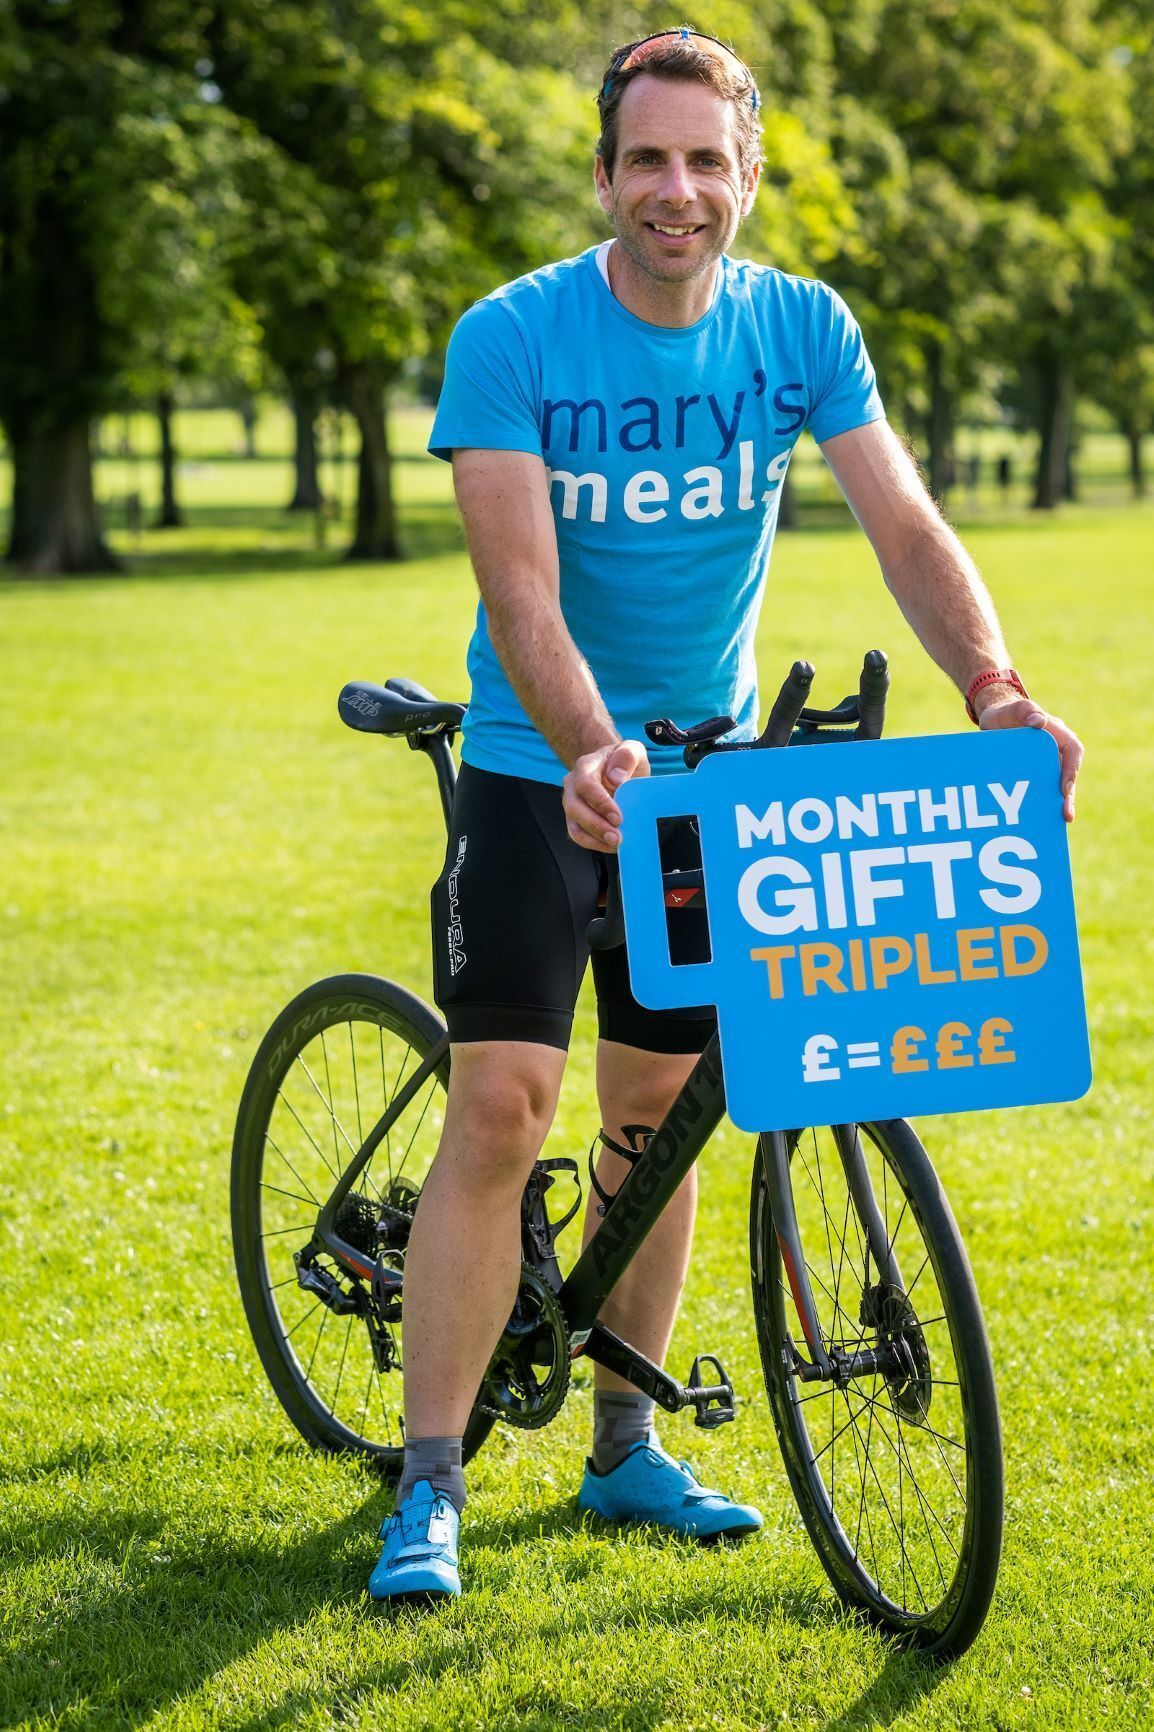 Mark Beaumont, who is giving his support to Mary's Meals.